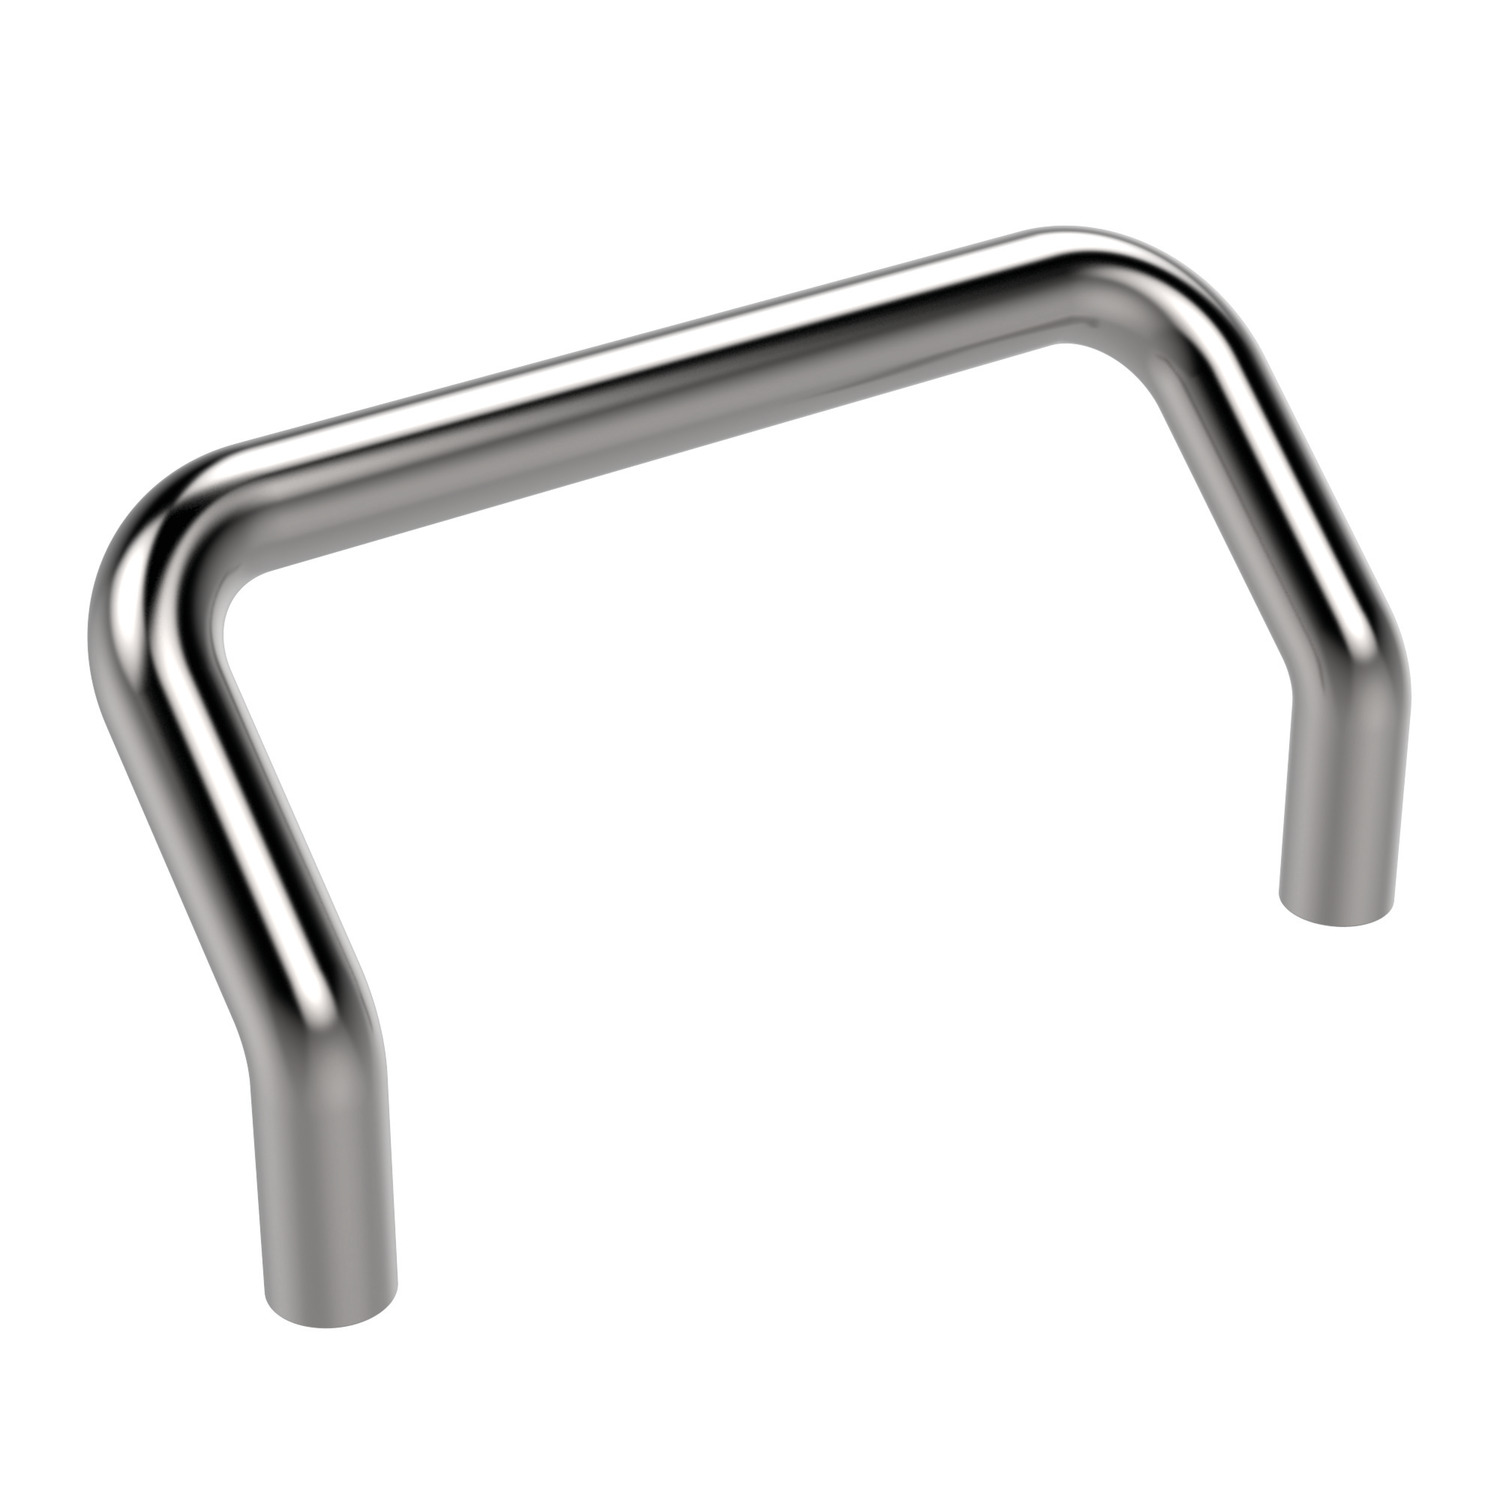 Product 78780, Pull Handles - Offset steel / 